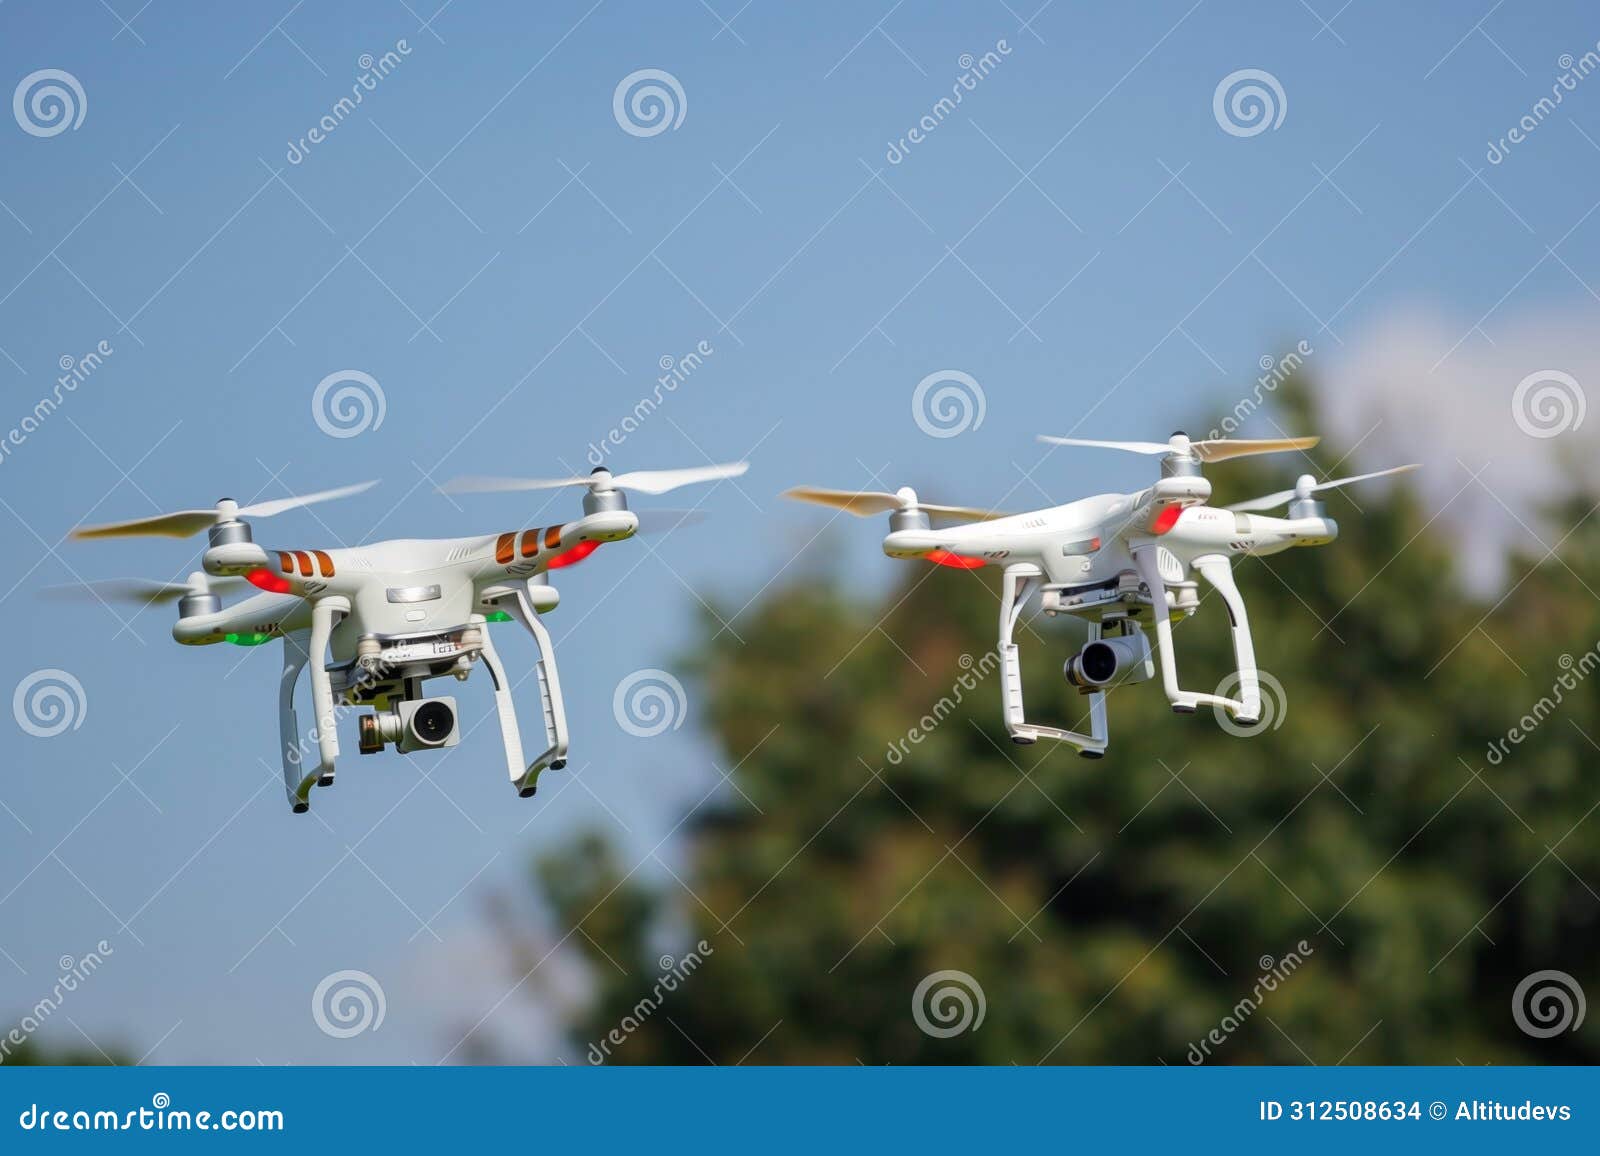 two drones competing closely in a highspeed chase